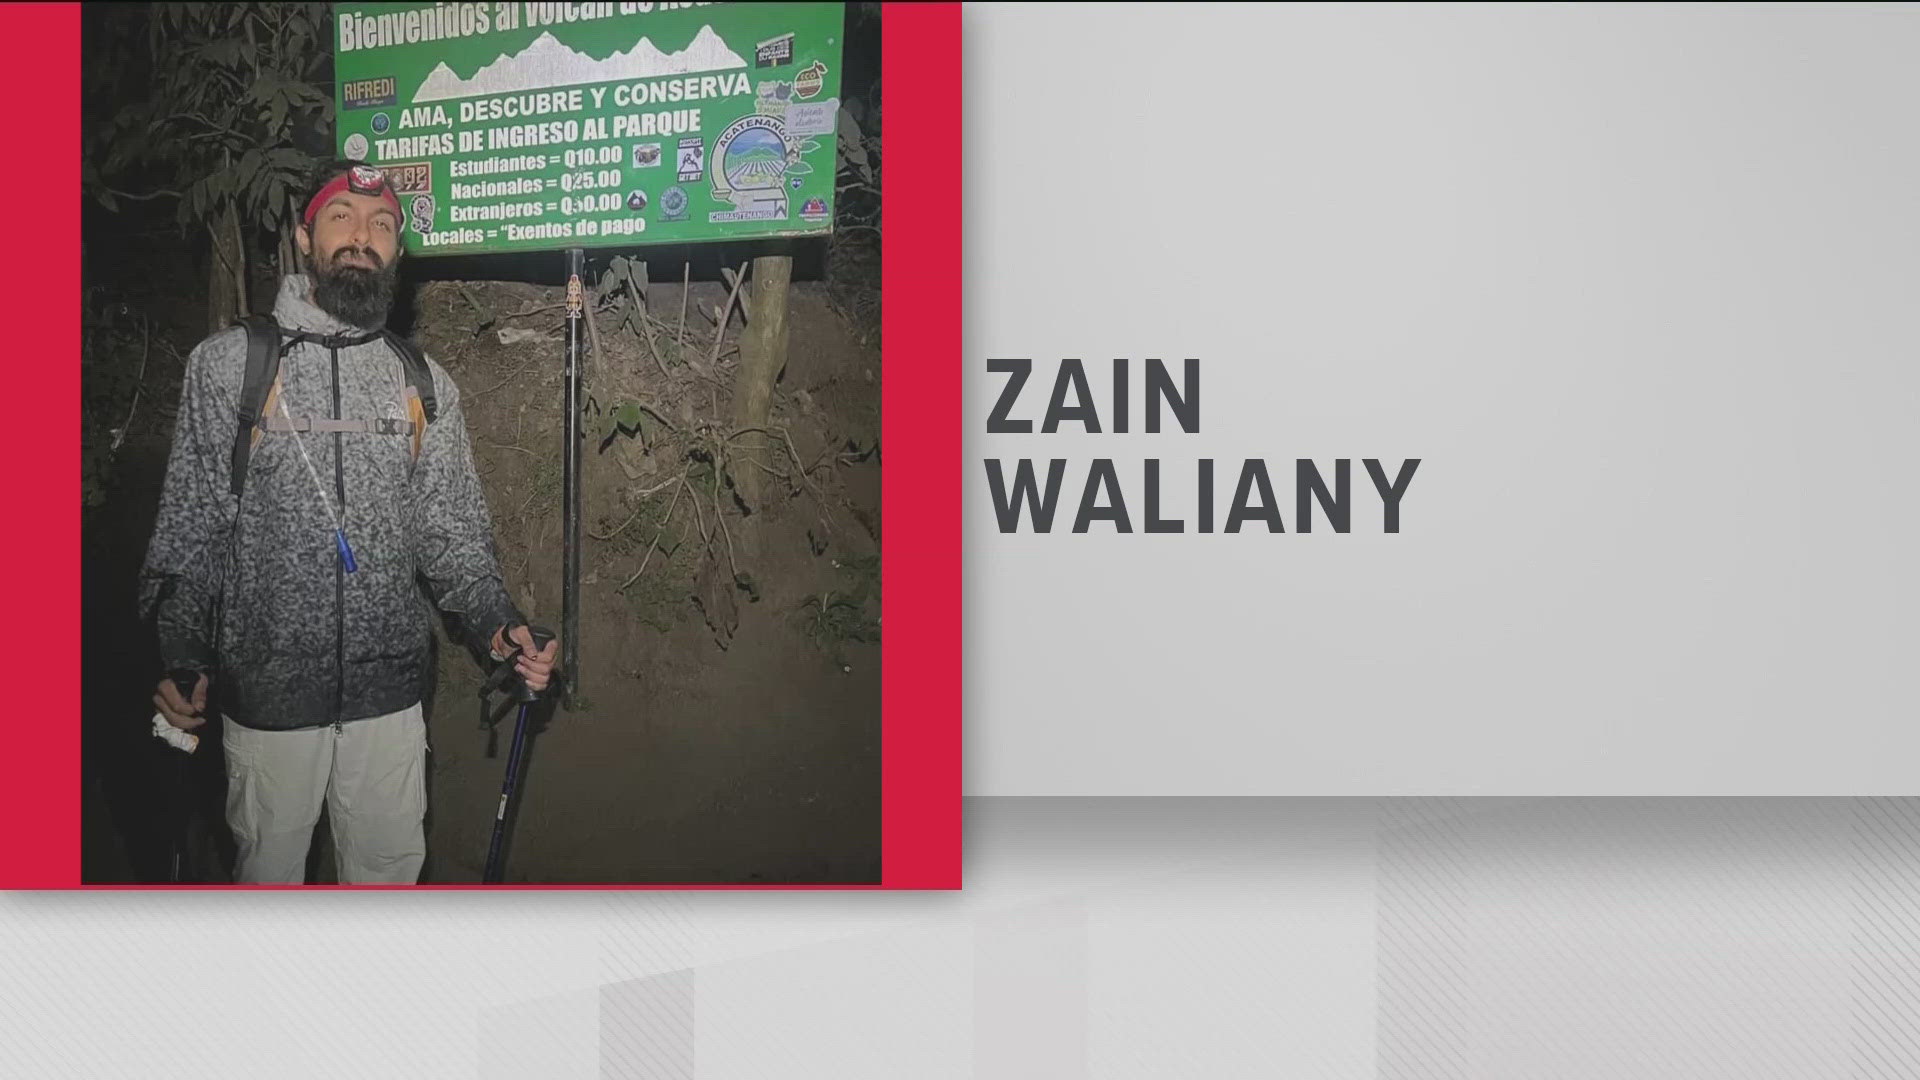 26-year-old Zain Waliany was hiking Antigua's Acatenango Volcano with friends when they separated. He's been missing since May 21.